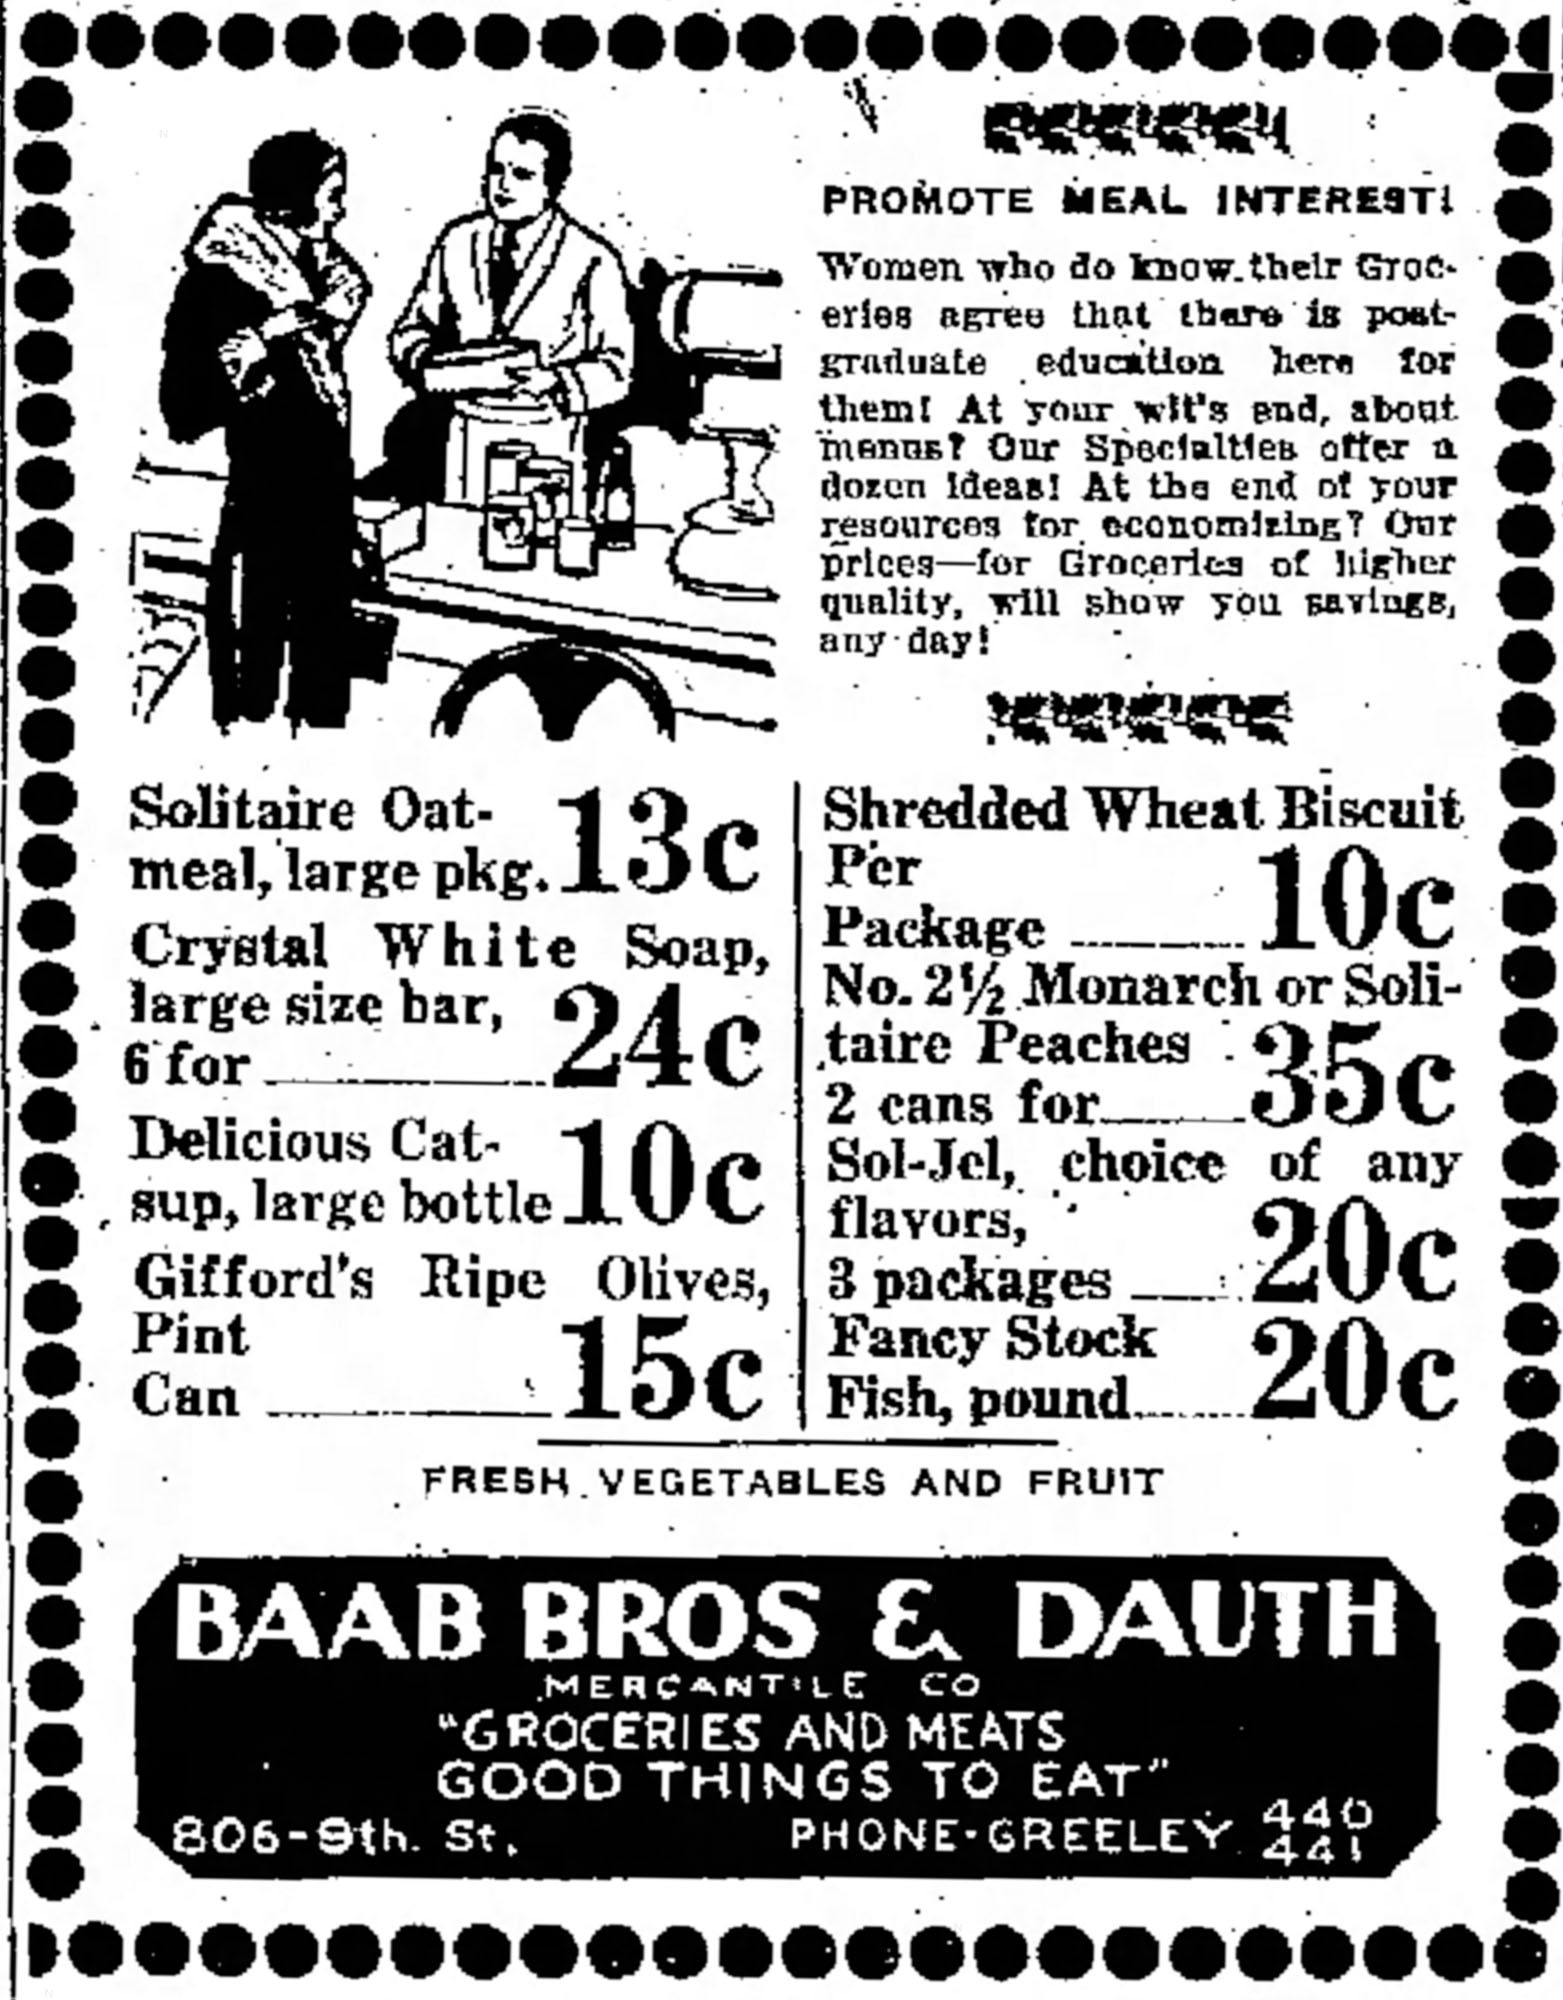 Dauth Family Archive - 1932-12-02 - Greeley Daily Tribune - Baab Bros and Dauth Advertisement